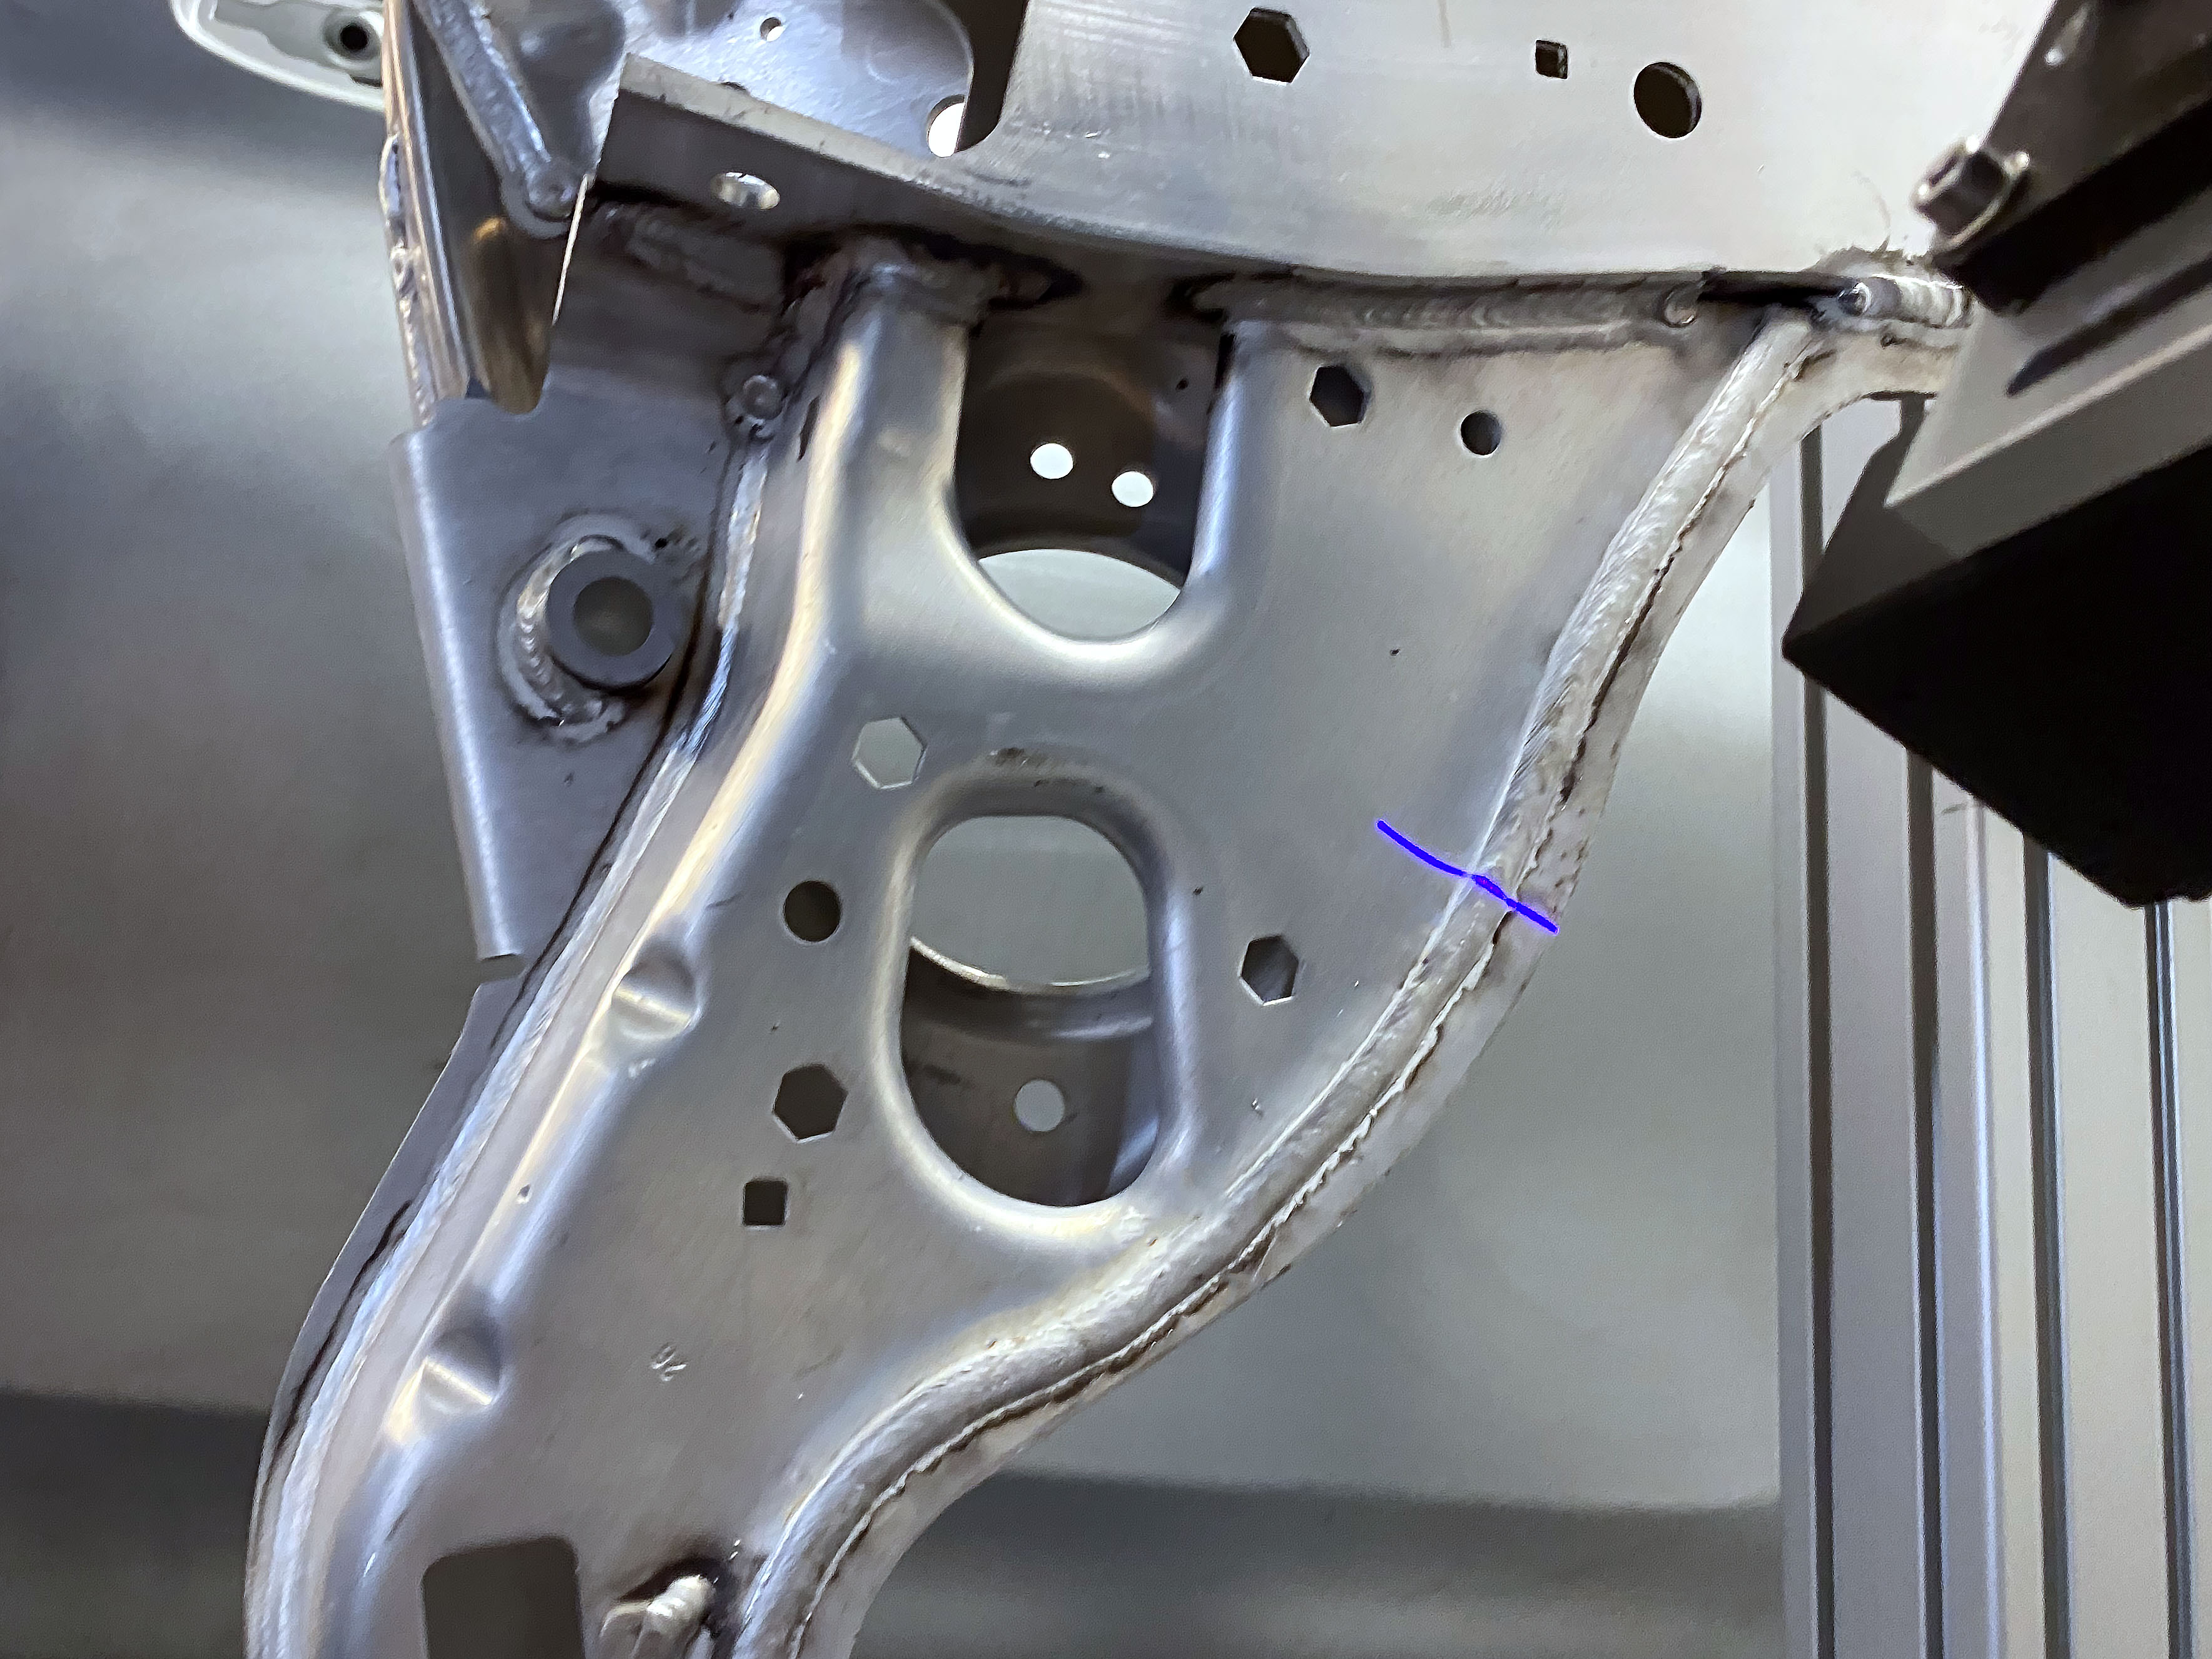 High-quality weld seam inspection in practice